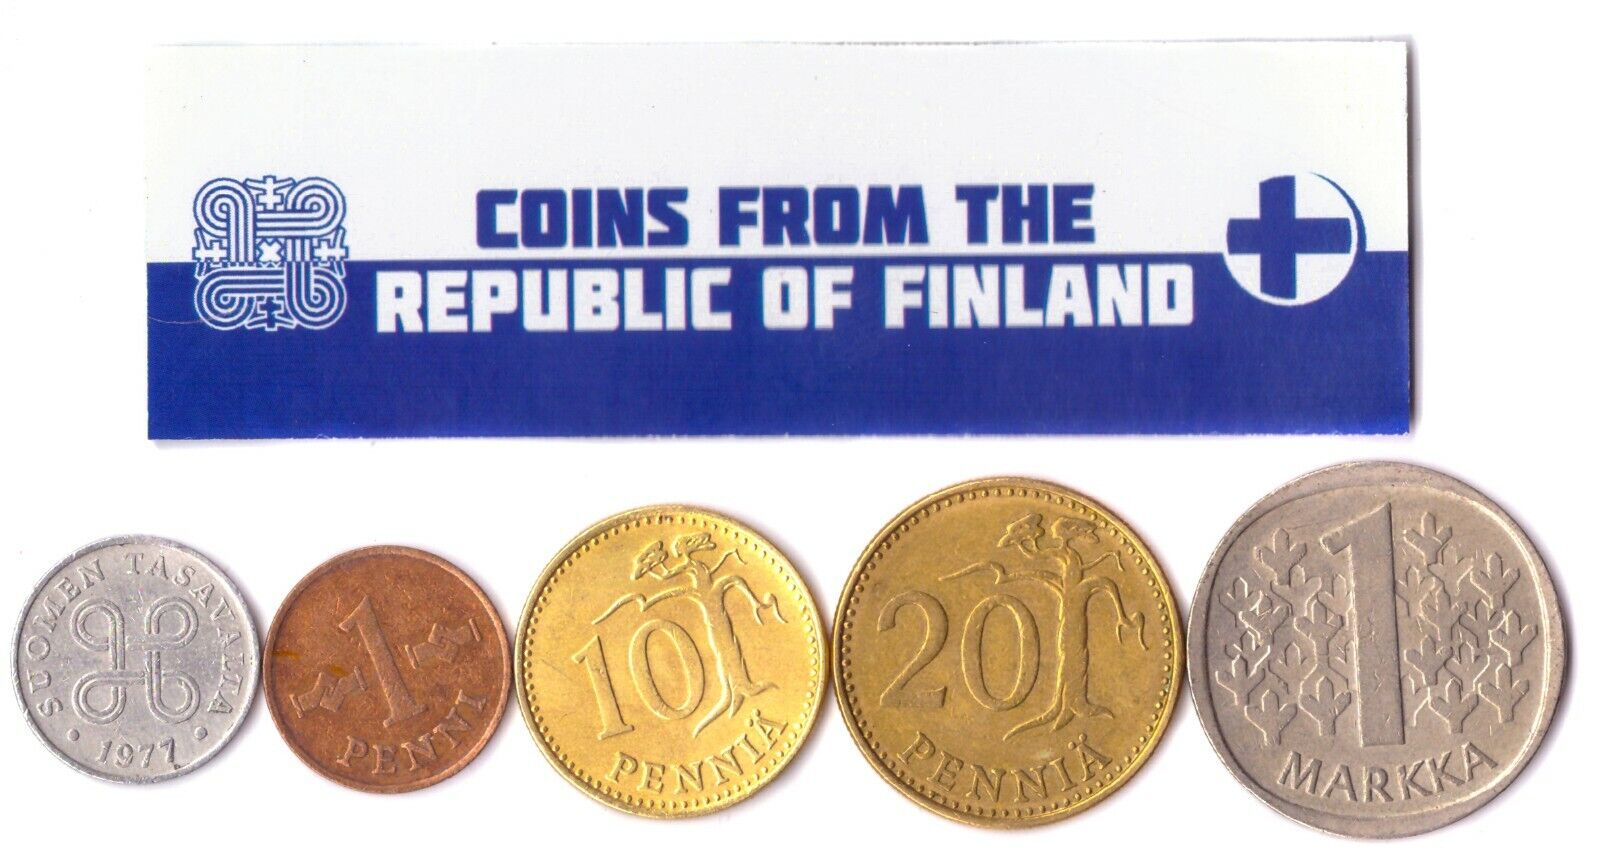 5 FINNISH COINS DIFFERENT EUROPEAN COINS FOREIGN CURRENCY, VALUABLE MONEY Без бренда - фотография #2